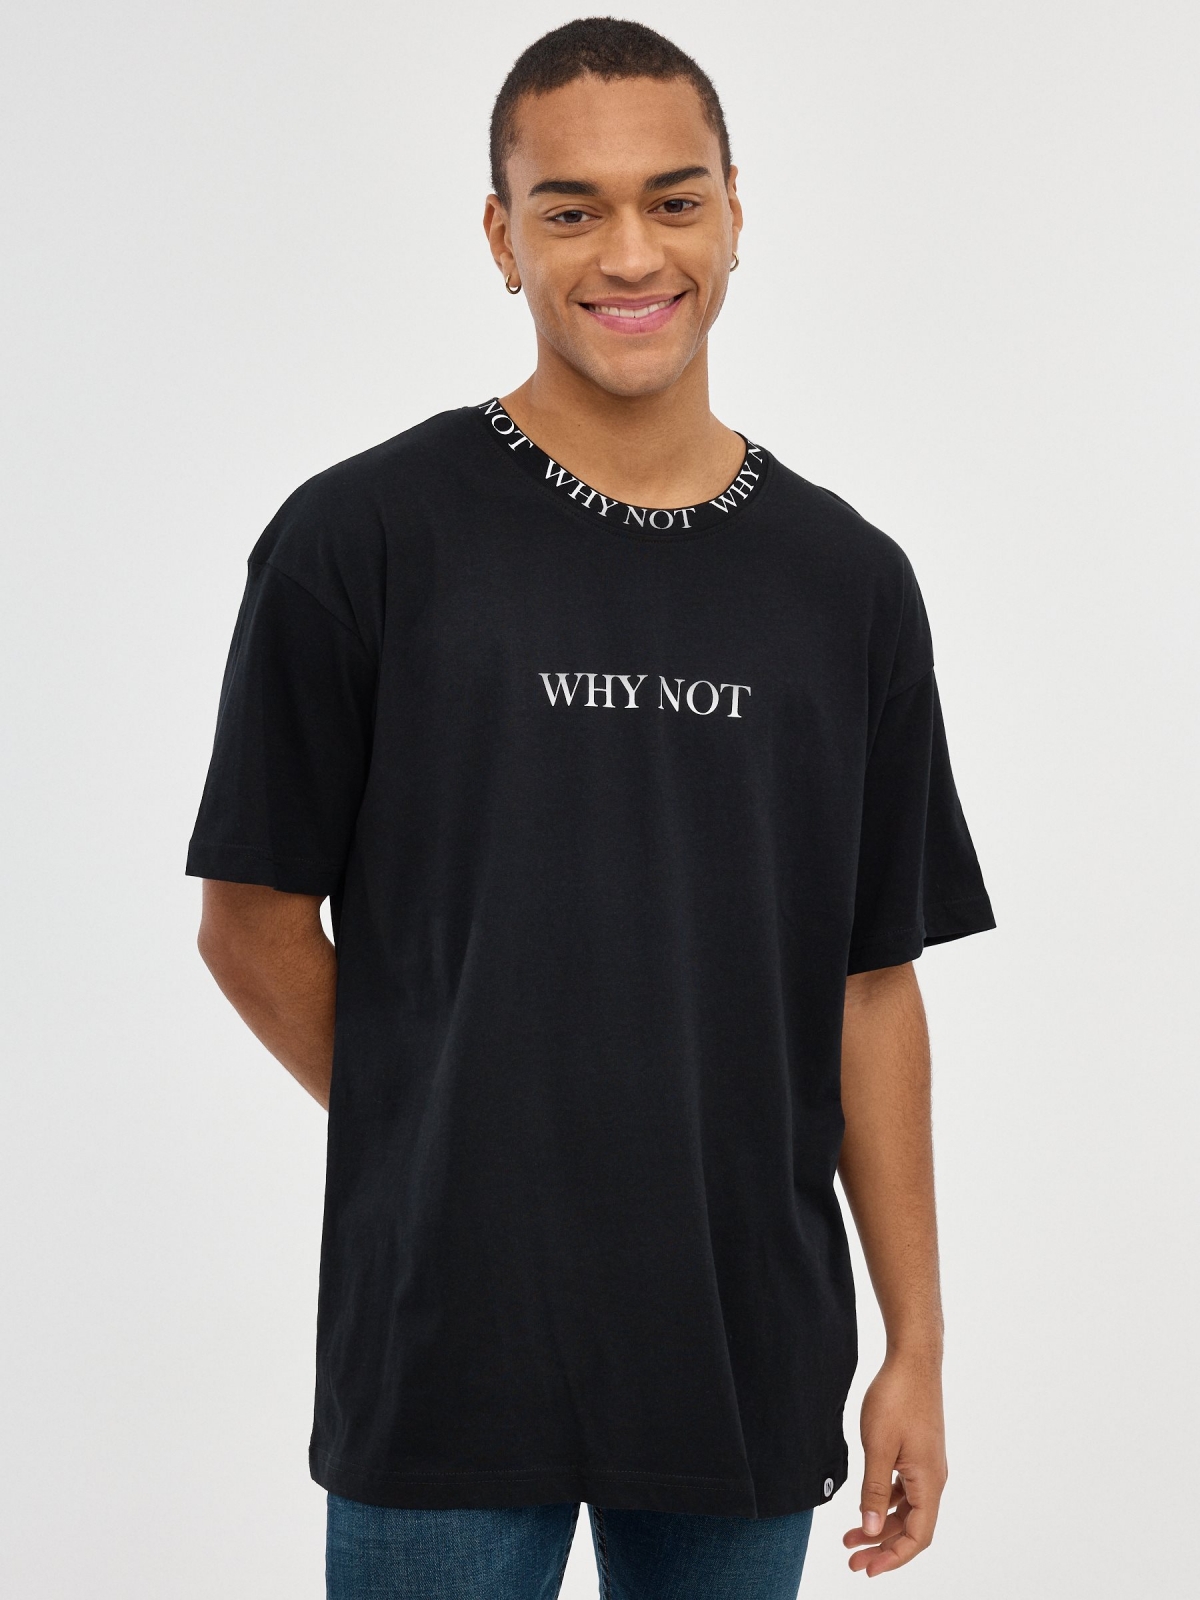 Why Not T-shirt black middle front view